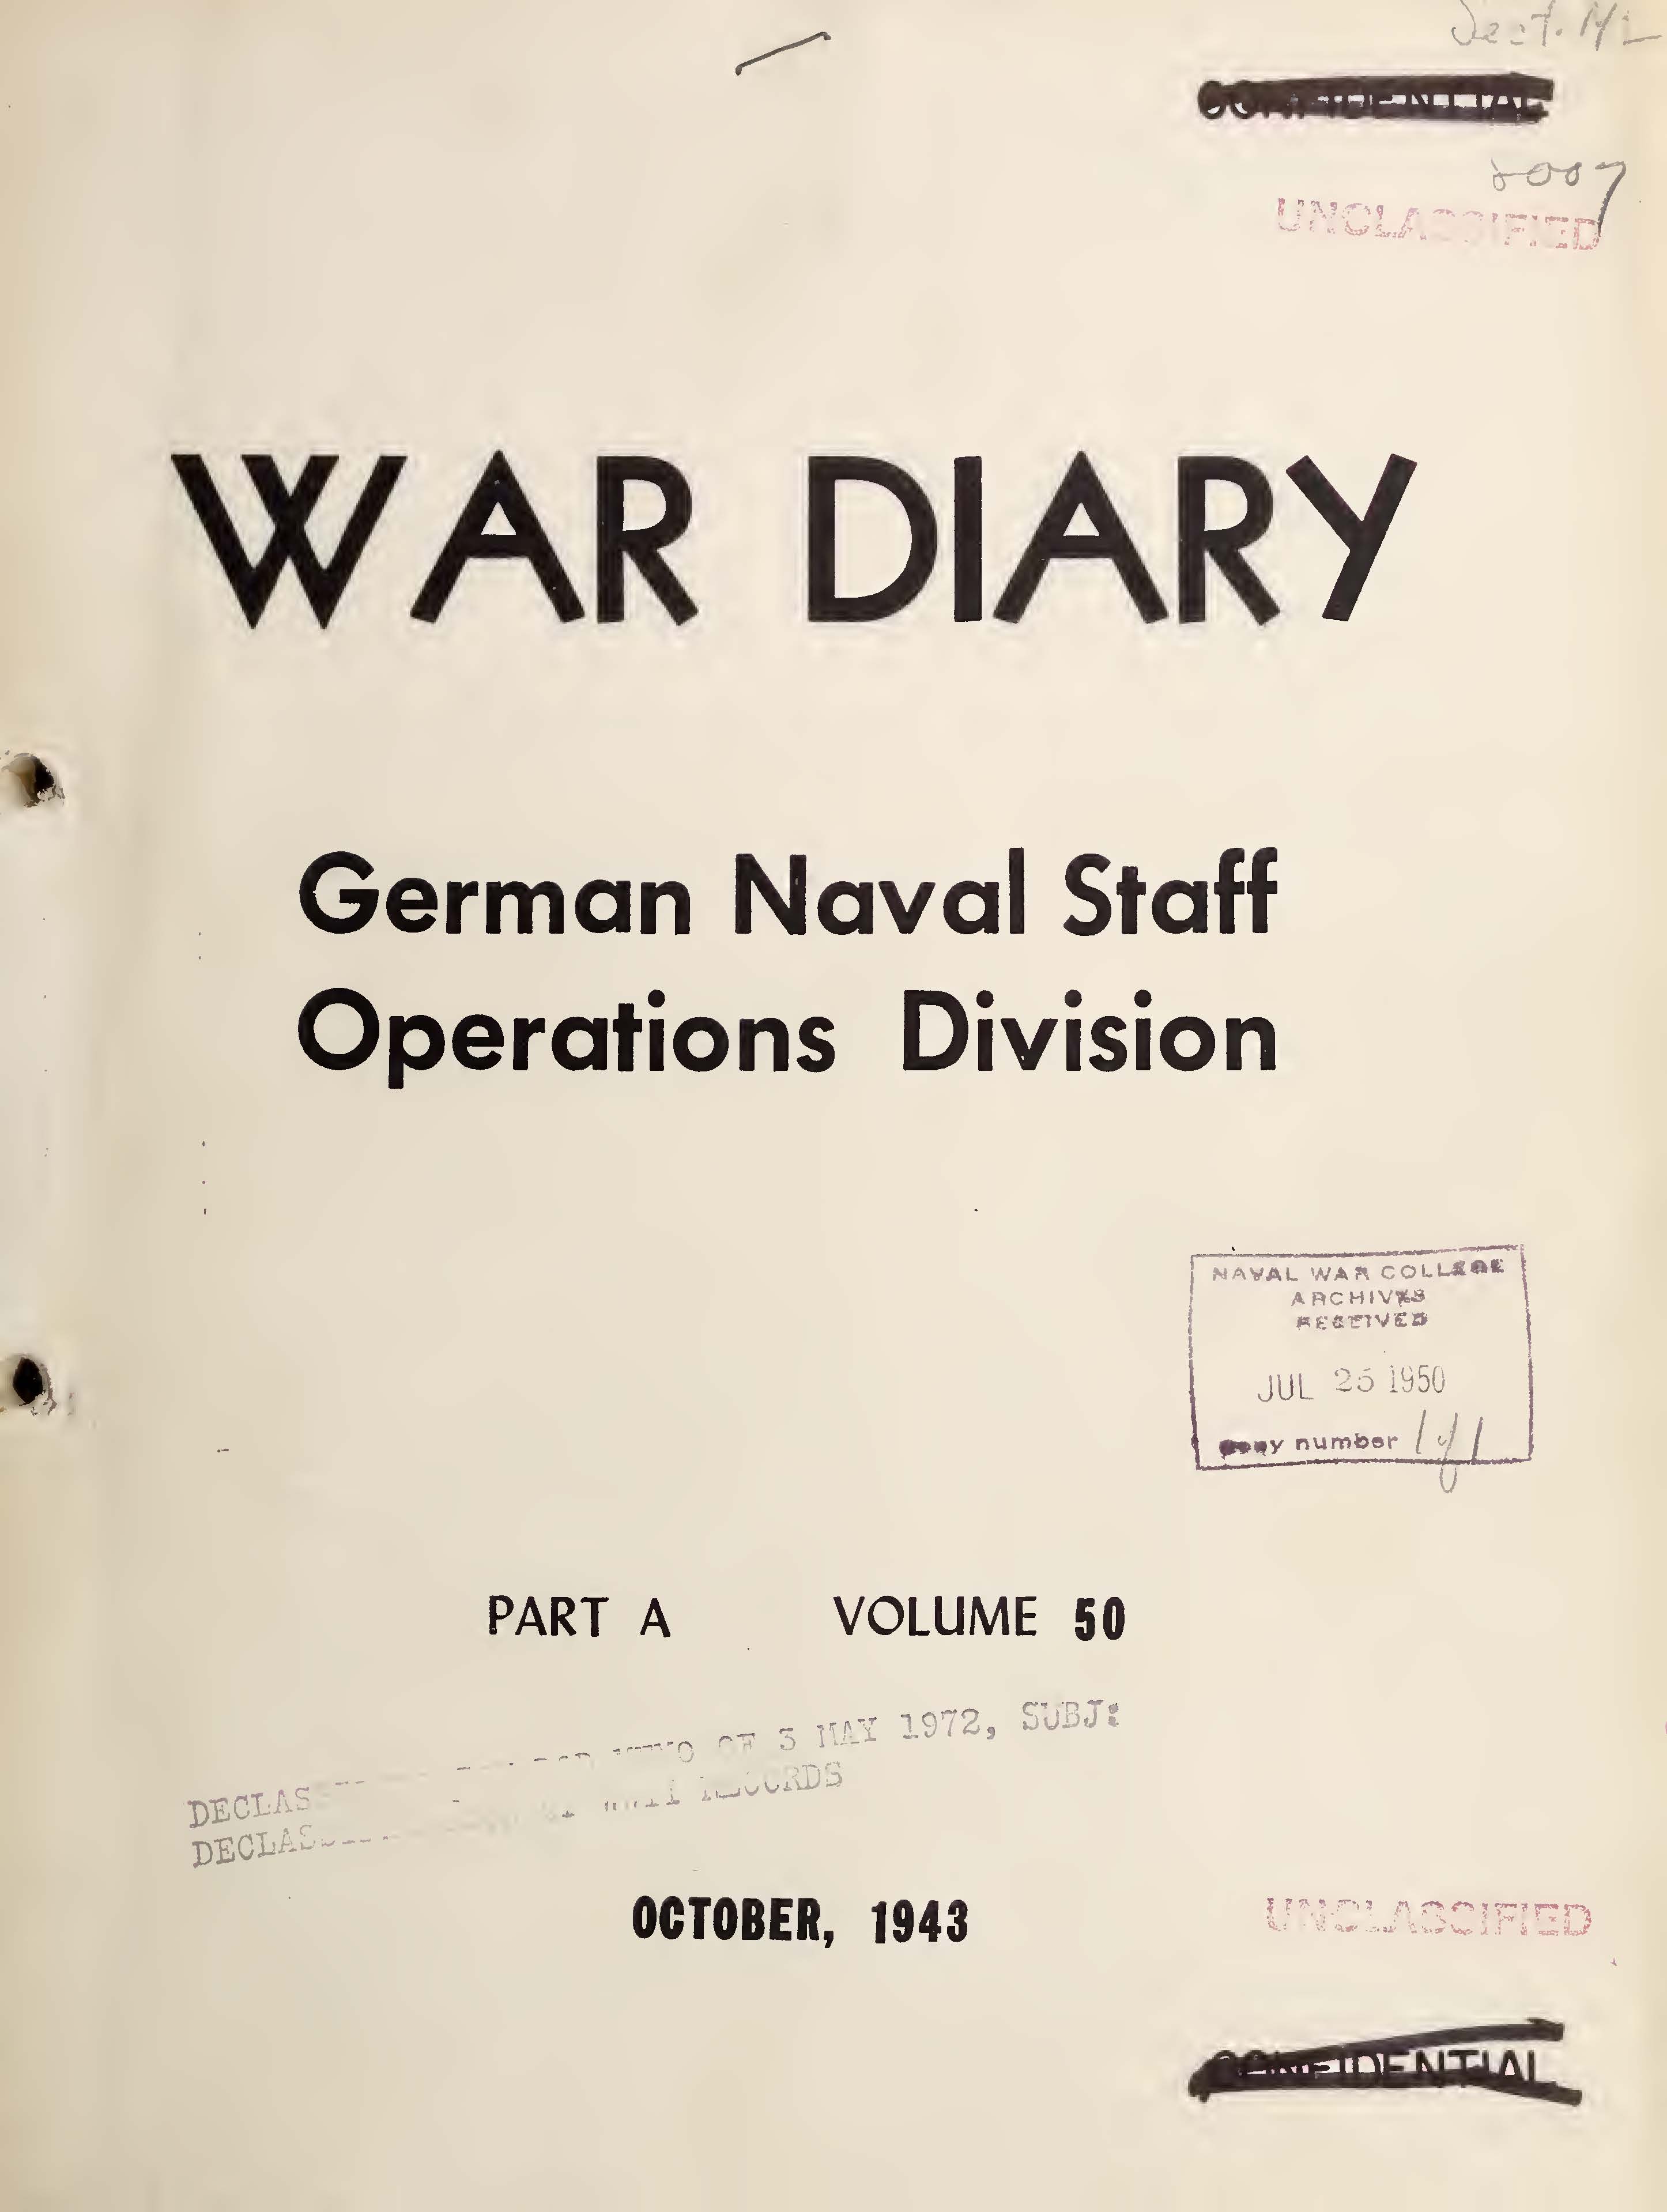 War Diary of German Naval Staff (Operations Division) Part A, Volume 50, October 1943